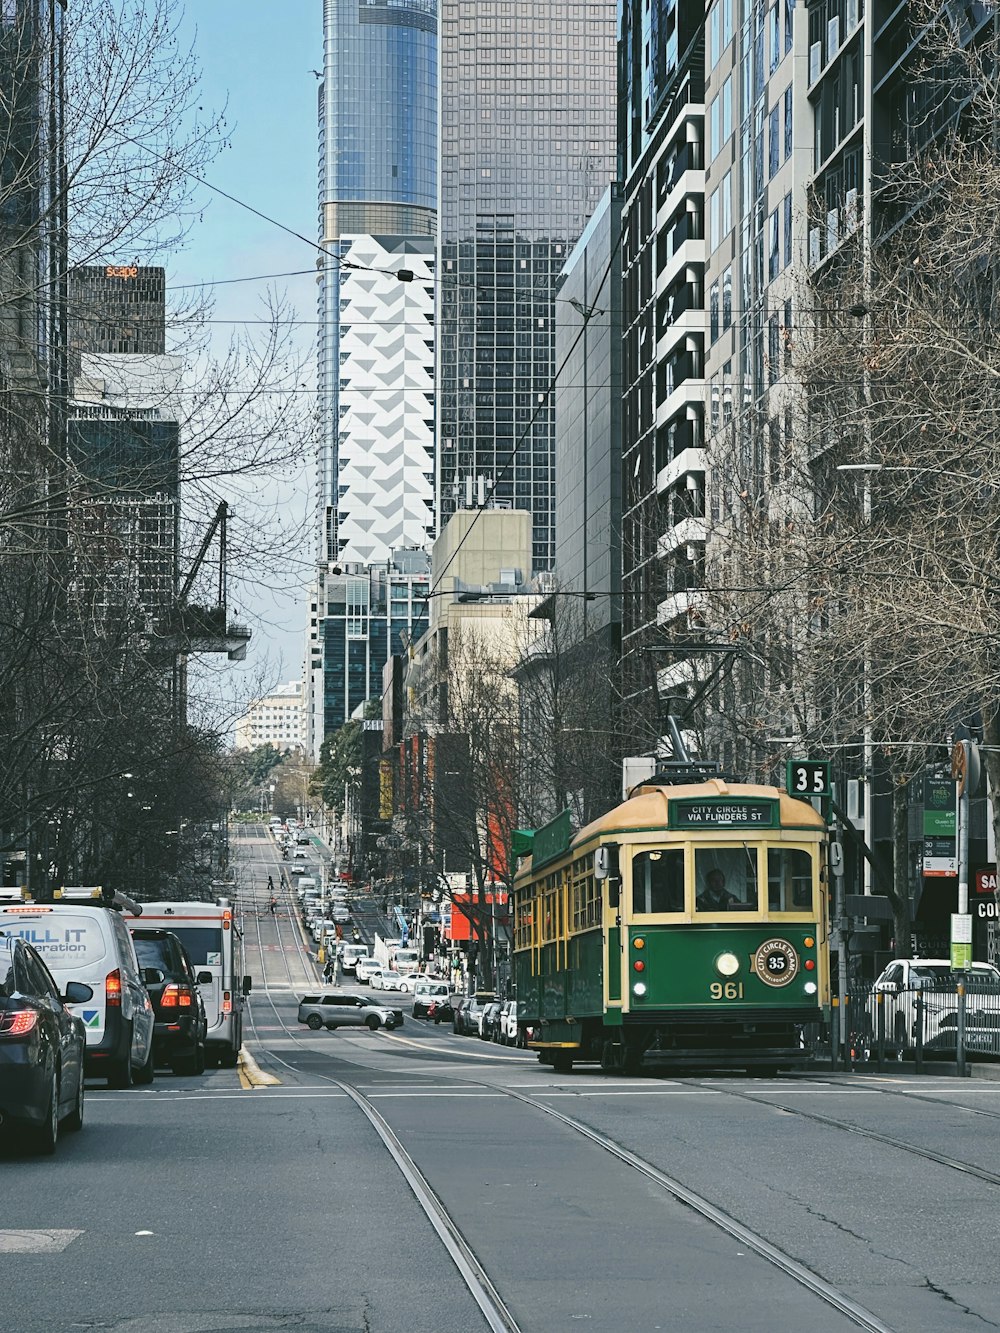 a trolley car on a city street with tall buildings